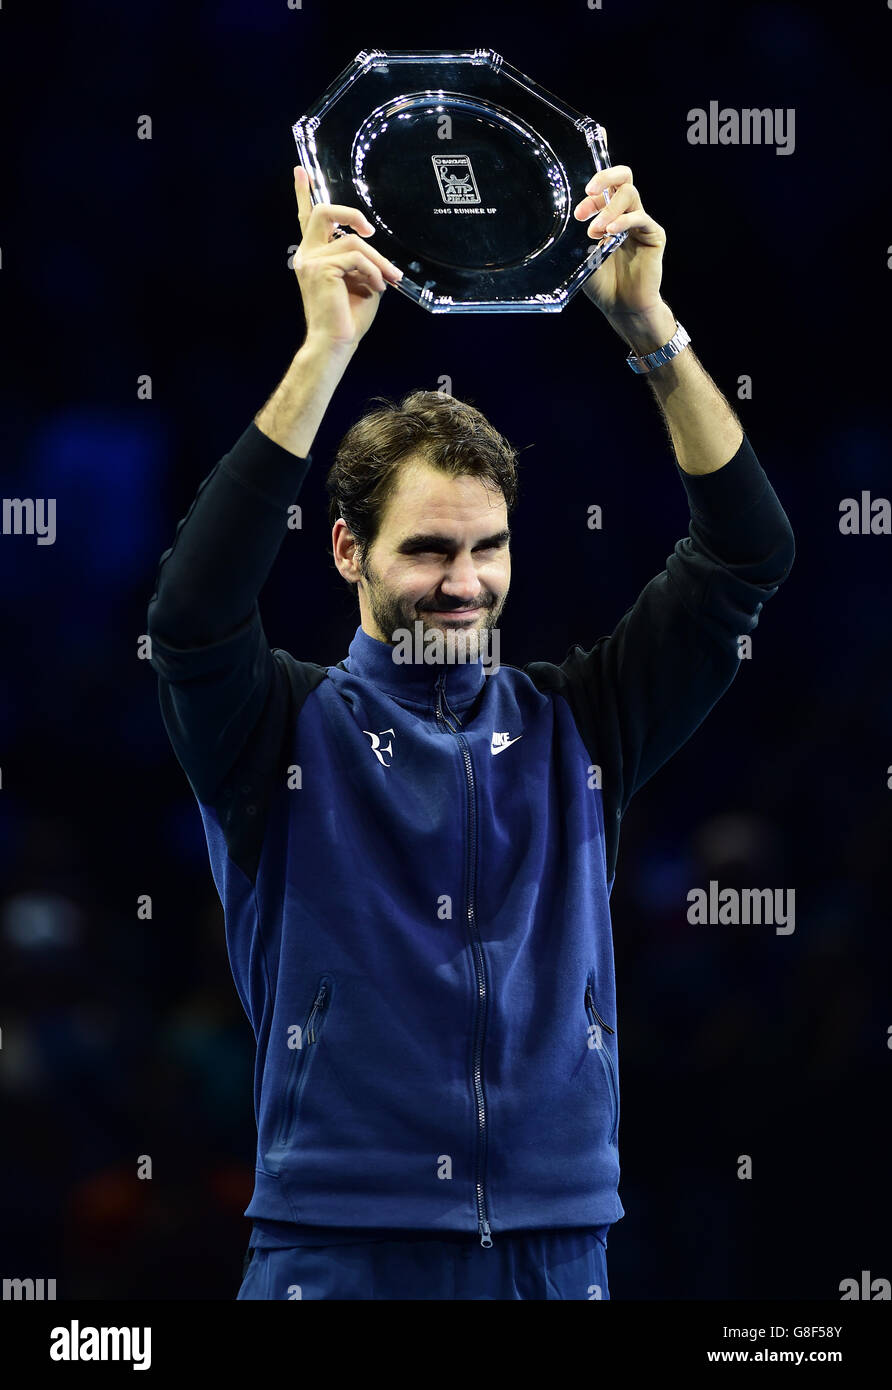 Switzerland's Roger Federer with his runners up trophy after the Final of the ATP World Tour Finals at the O2 Arena, London. PRESS ASSSOCIATION Photo. Picture date: Sunday November 22, 2015. See PA story TENNIS London. Photo credit should read: Adam Davy/PA Wire. Stock Photo